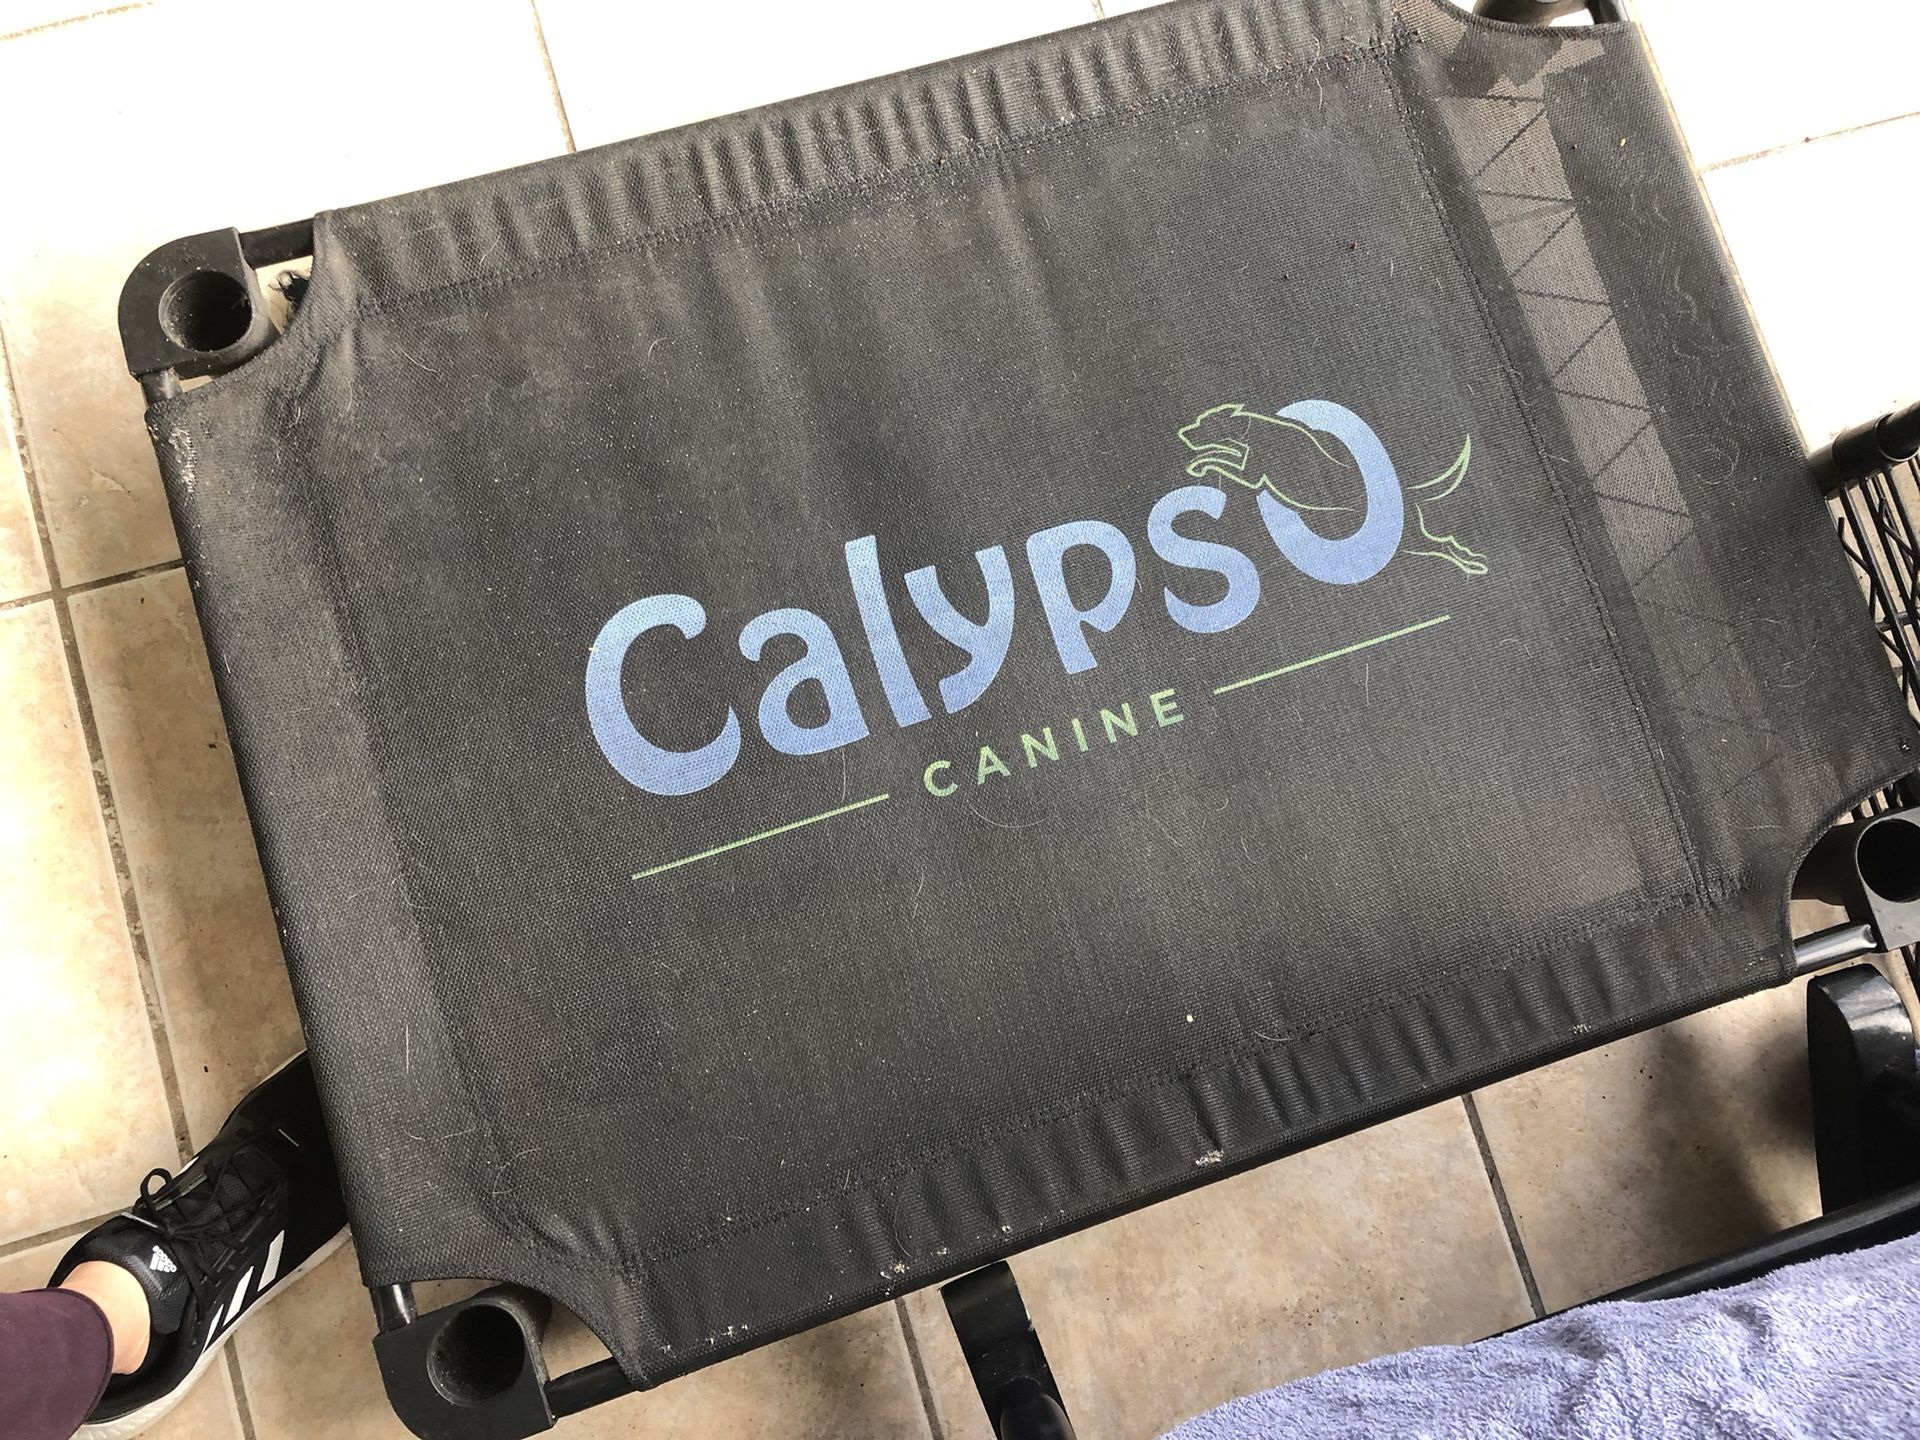 Calypso Canine dog cot bed